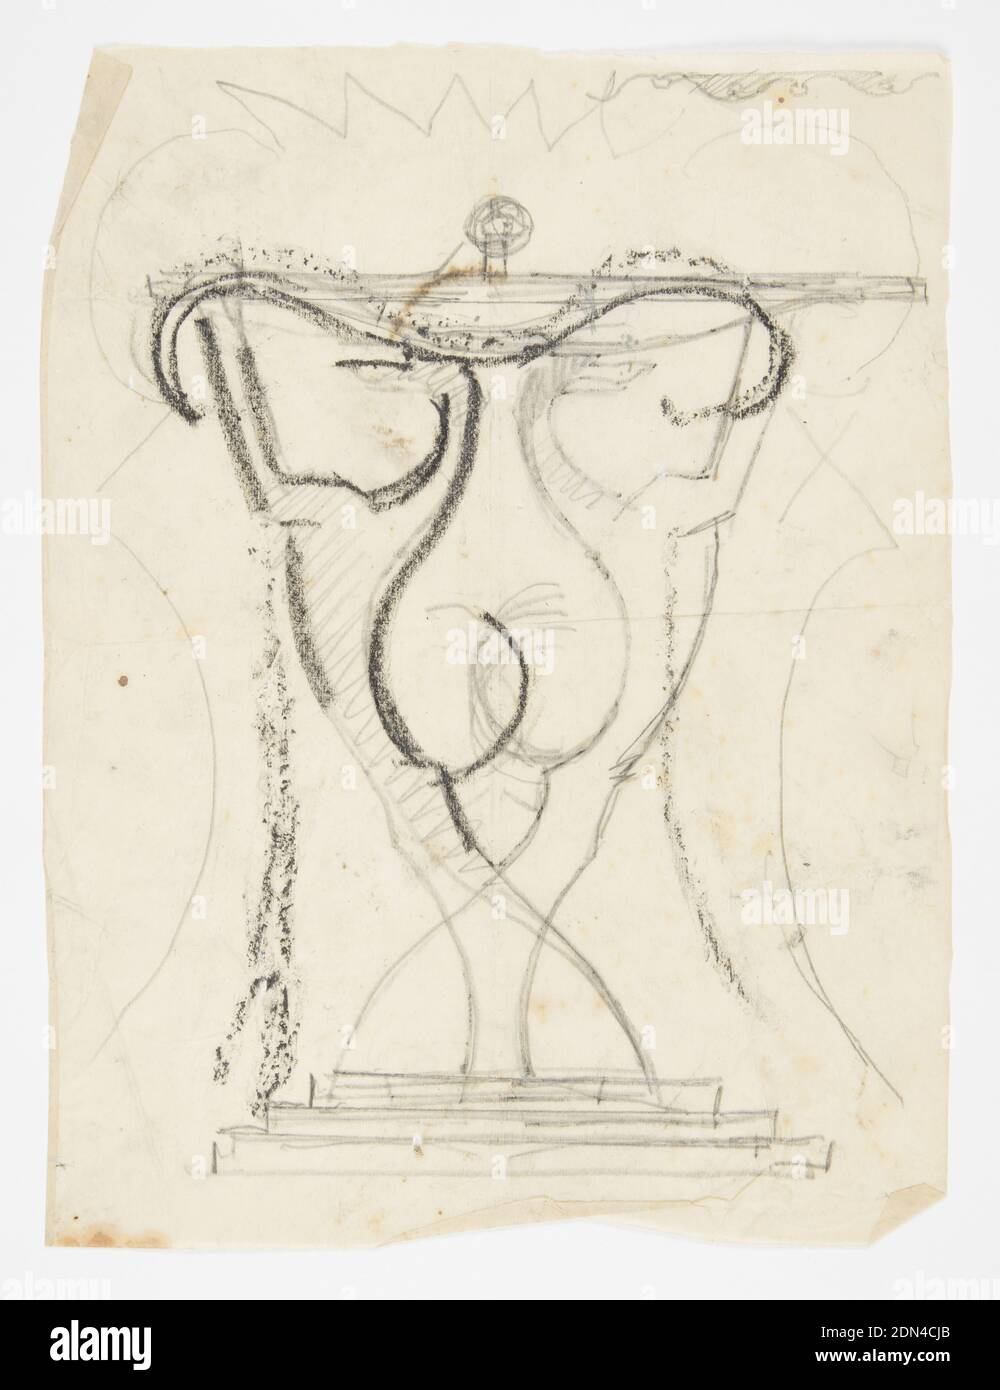 Design for Table, Hounds, William Hunt Diederich, American, b. Hungary, 1884–1953, Graphite and charcoal on paper, Design for a console table intended to be executed in iron. Two elongated hounds standing on their hind legs form the base of the table, their outstretched hands supporting the table top., USA, ca. 1916, furniture, Drawing Stock Photo